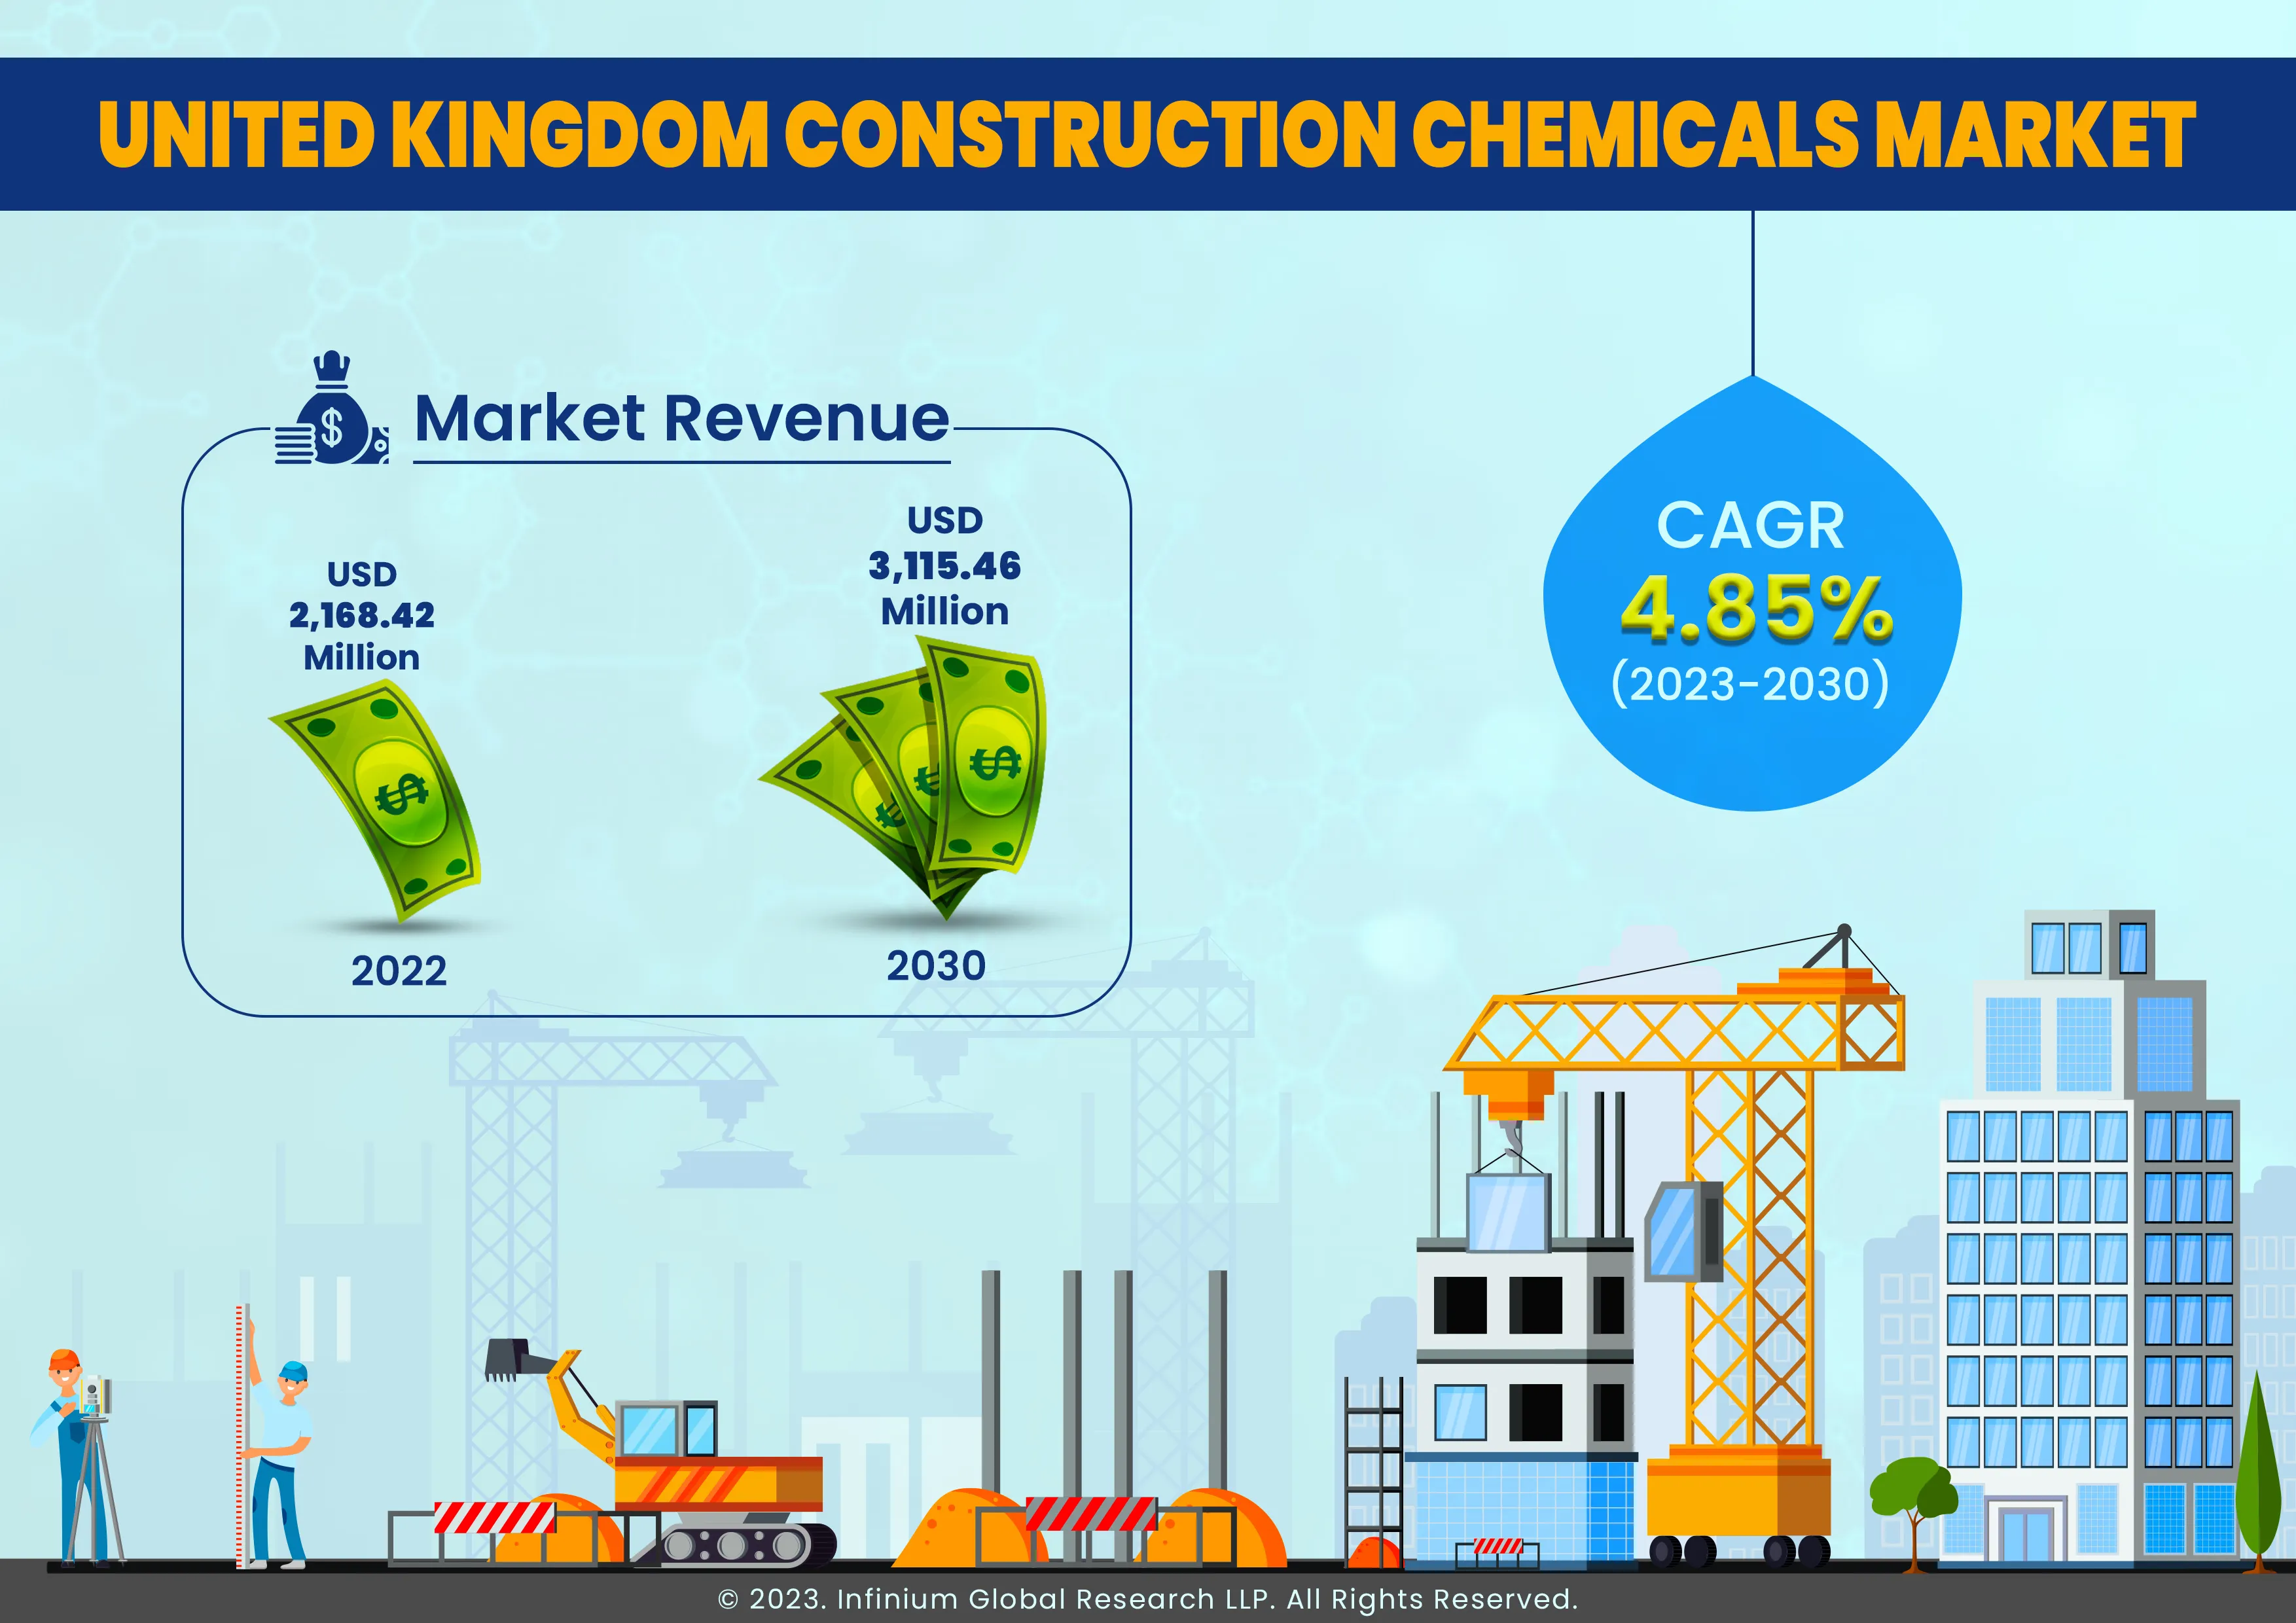 Infograph - United Kingdom Construction Chemicals Market was Valued at USD 2,168.42 Million in 2022 and